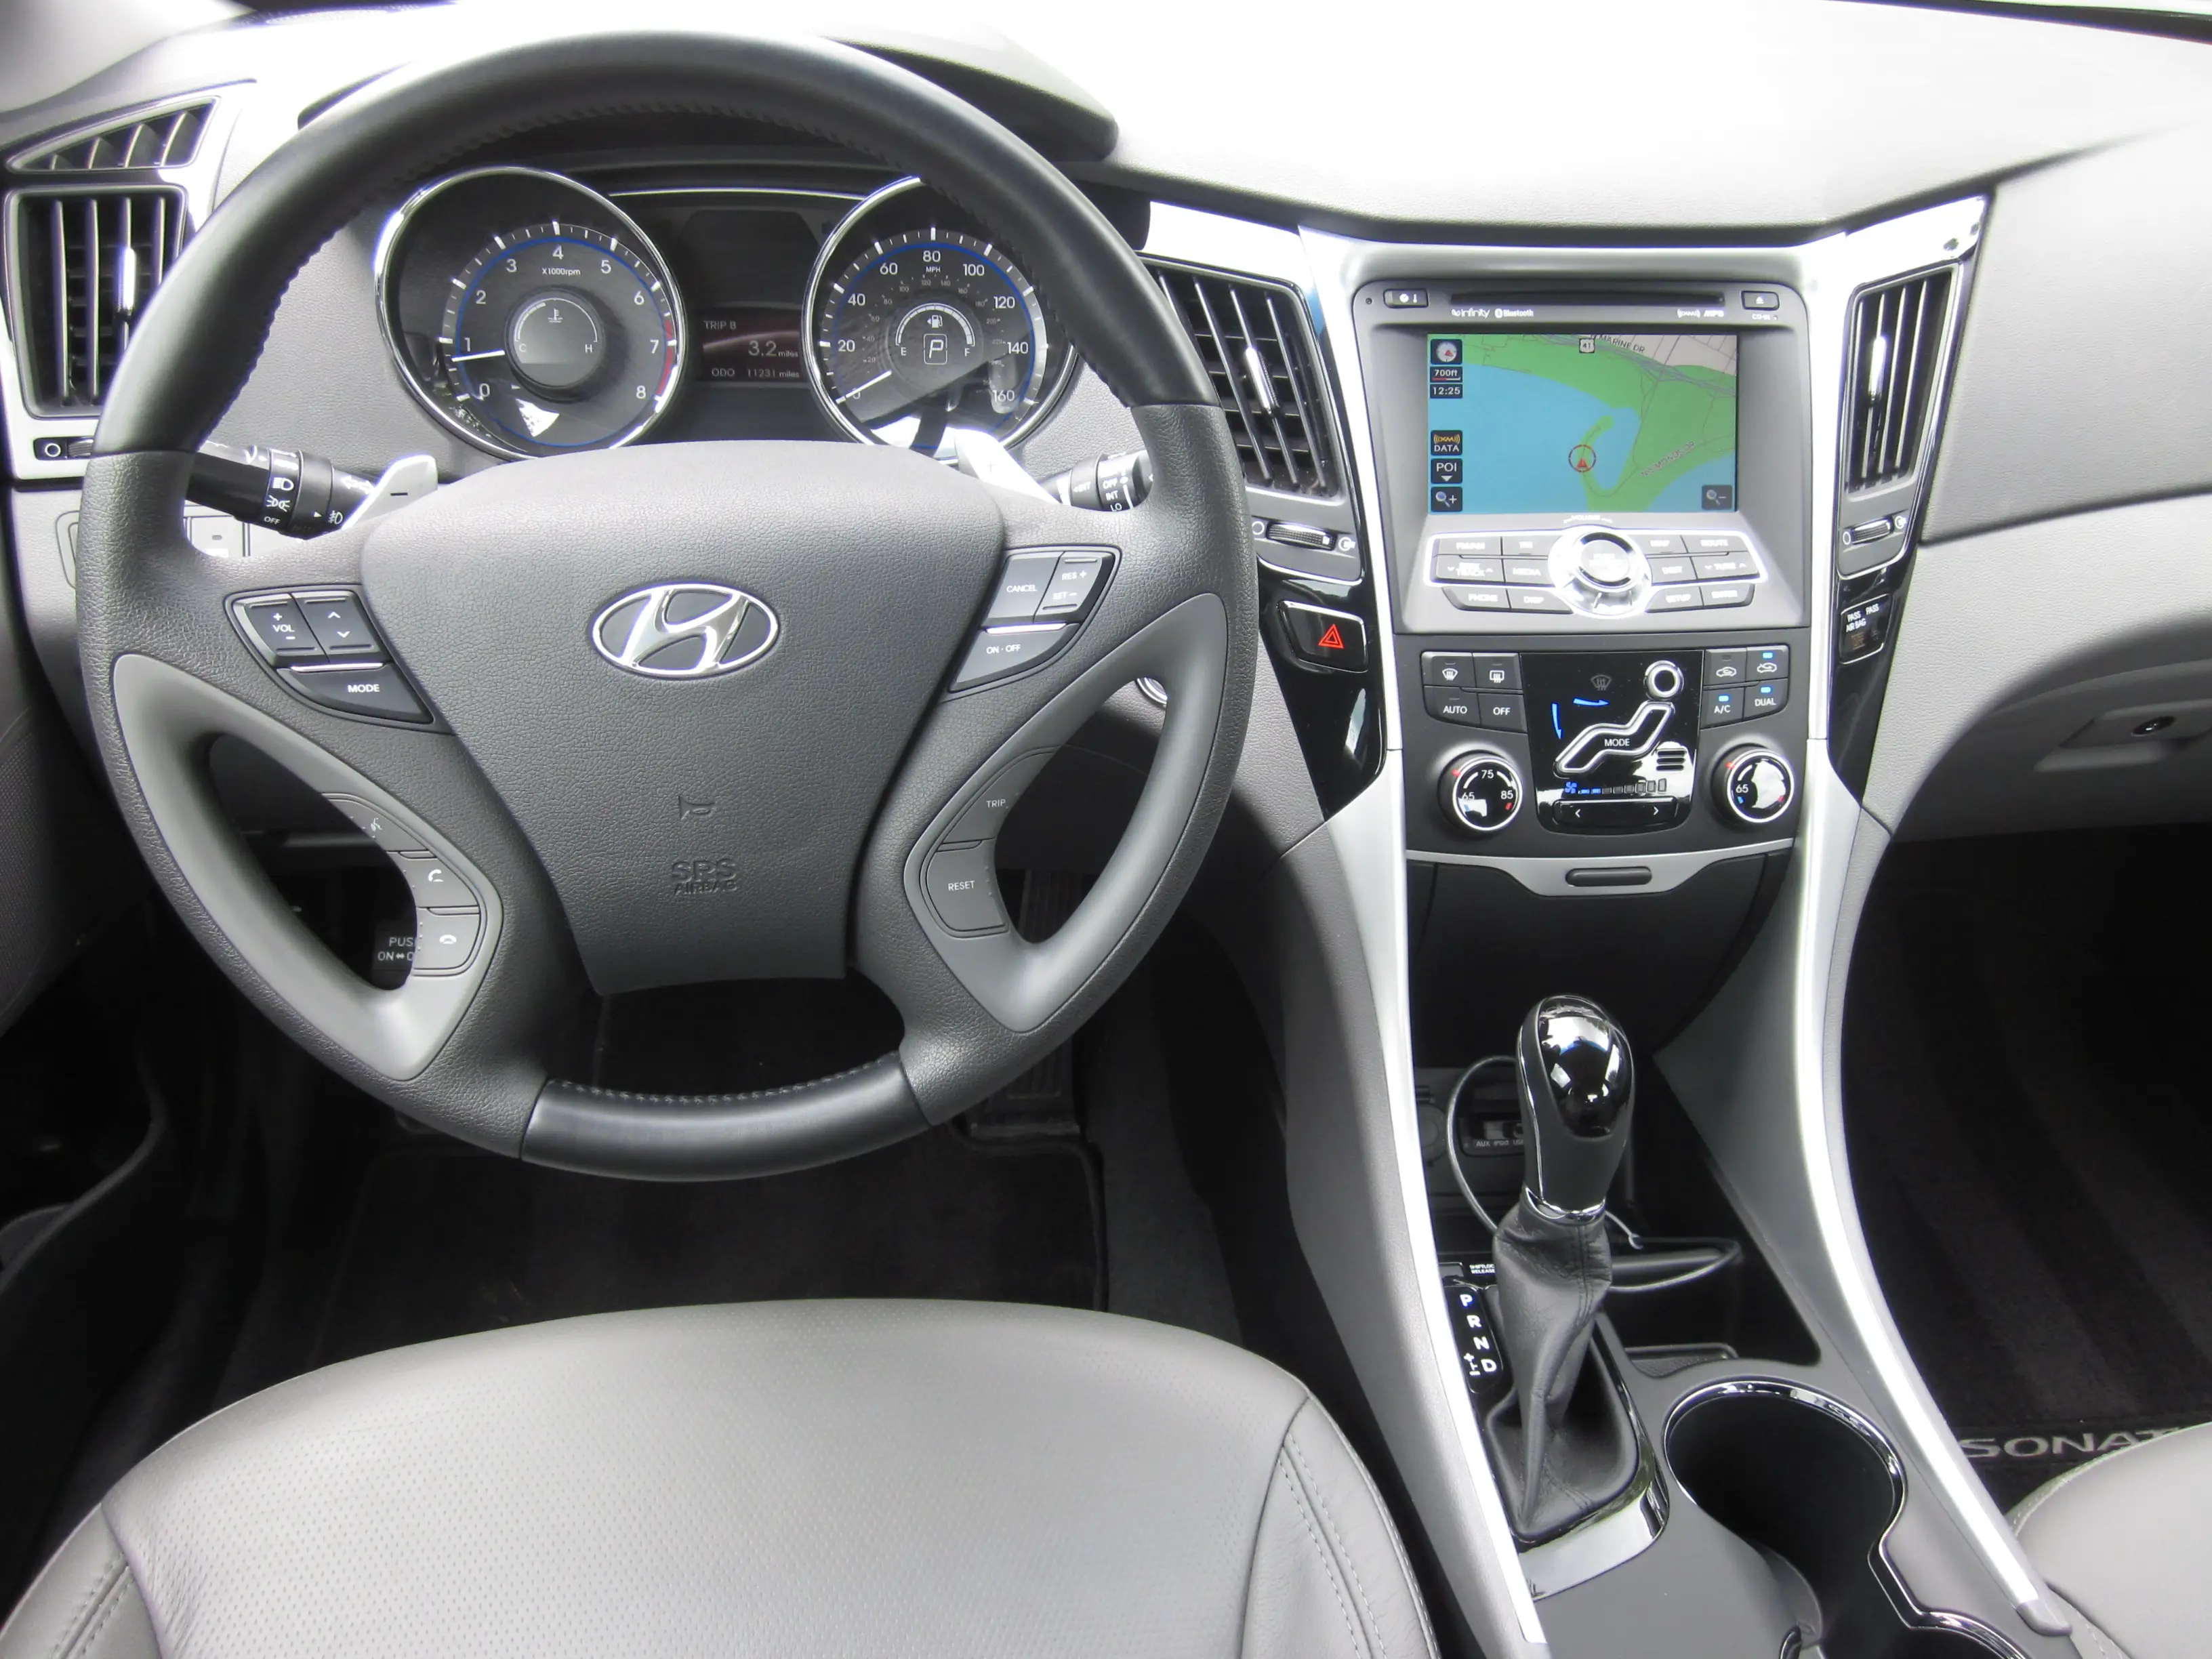 2011 Hyundai Sonata Limited Turbo Review What S Not To Like